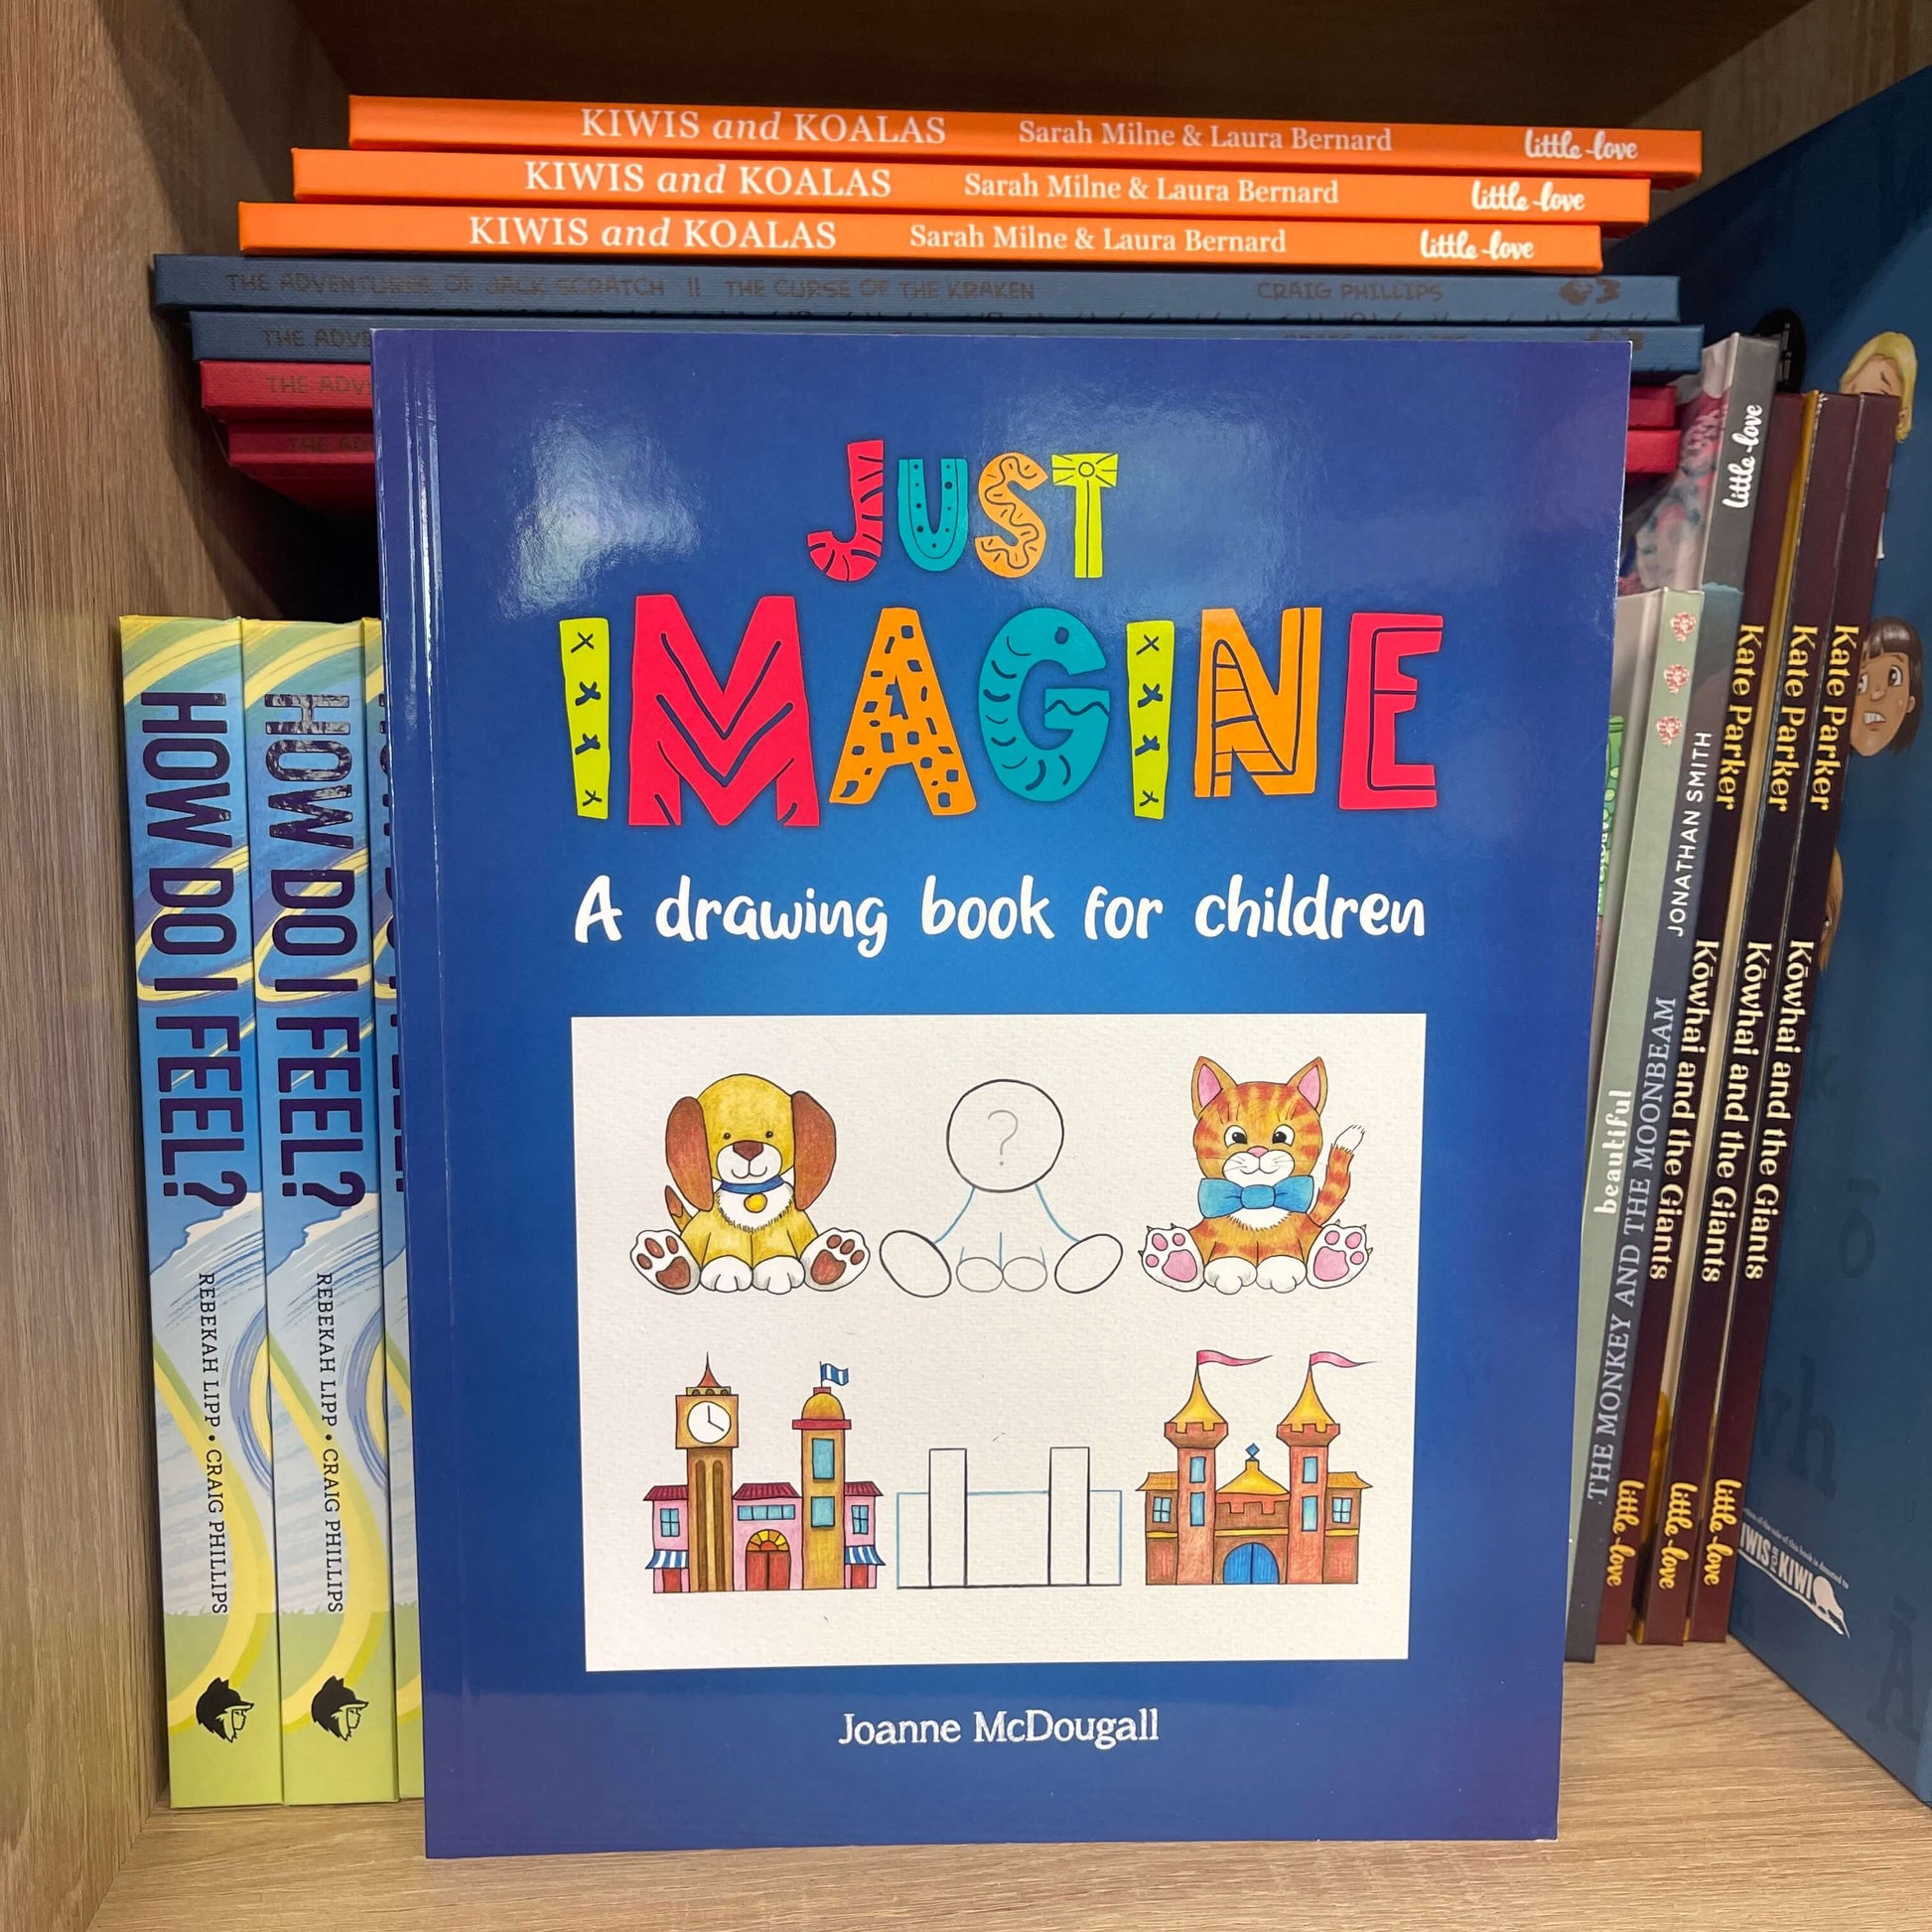 Just Imagine, a drawing book for children.